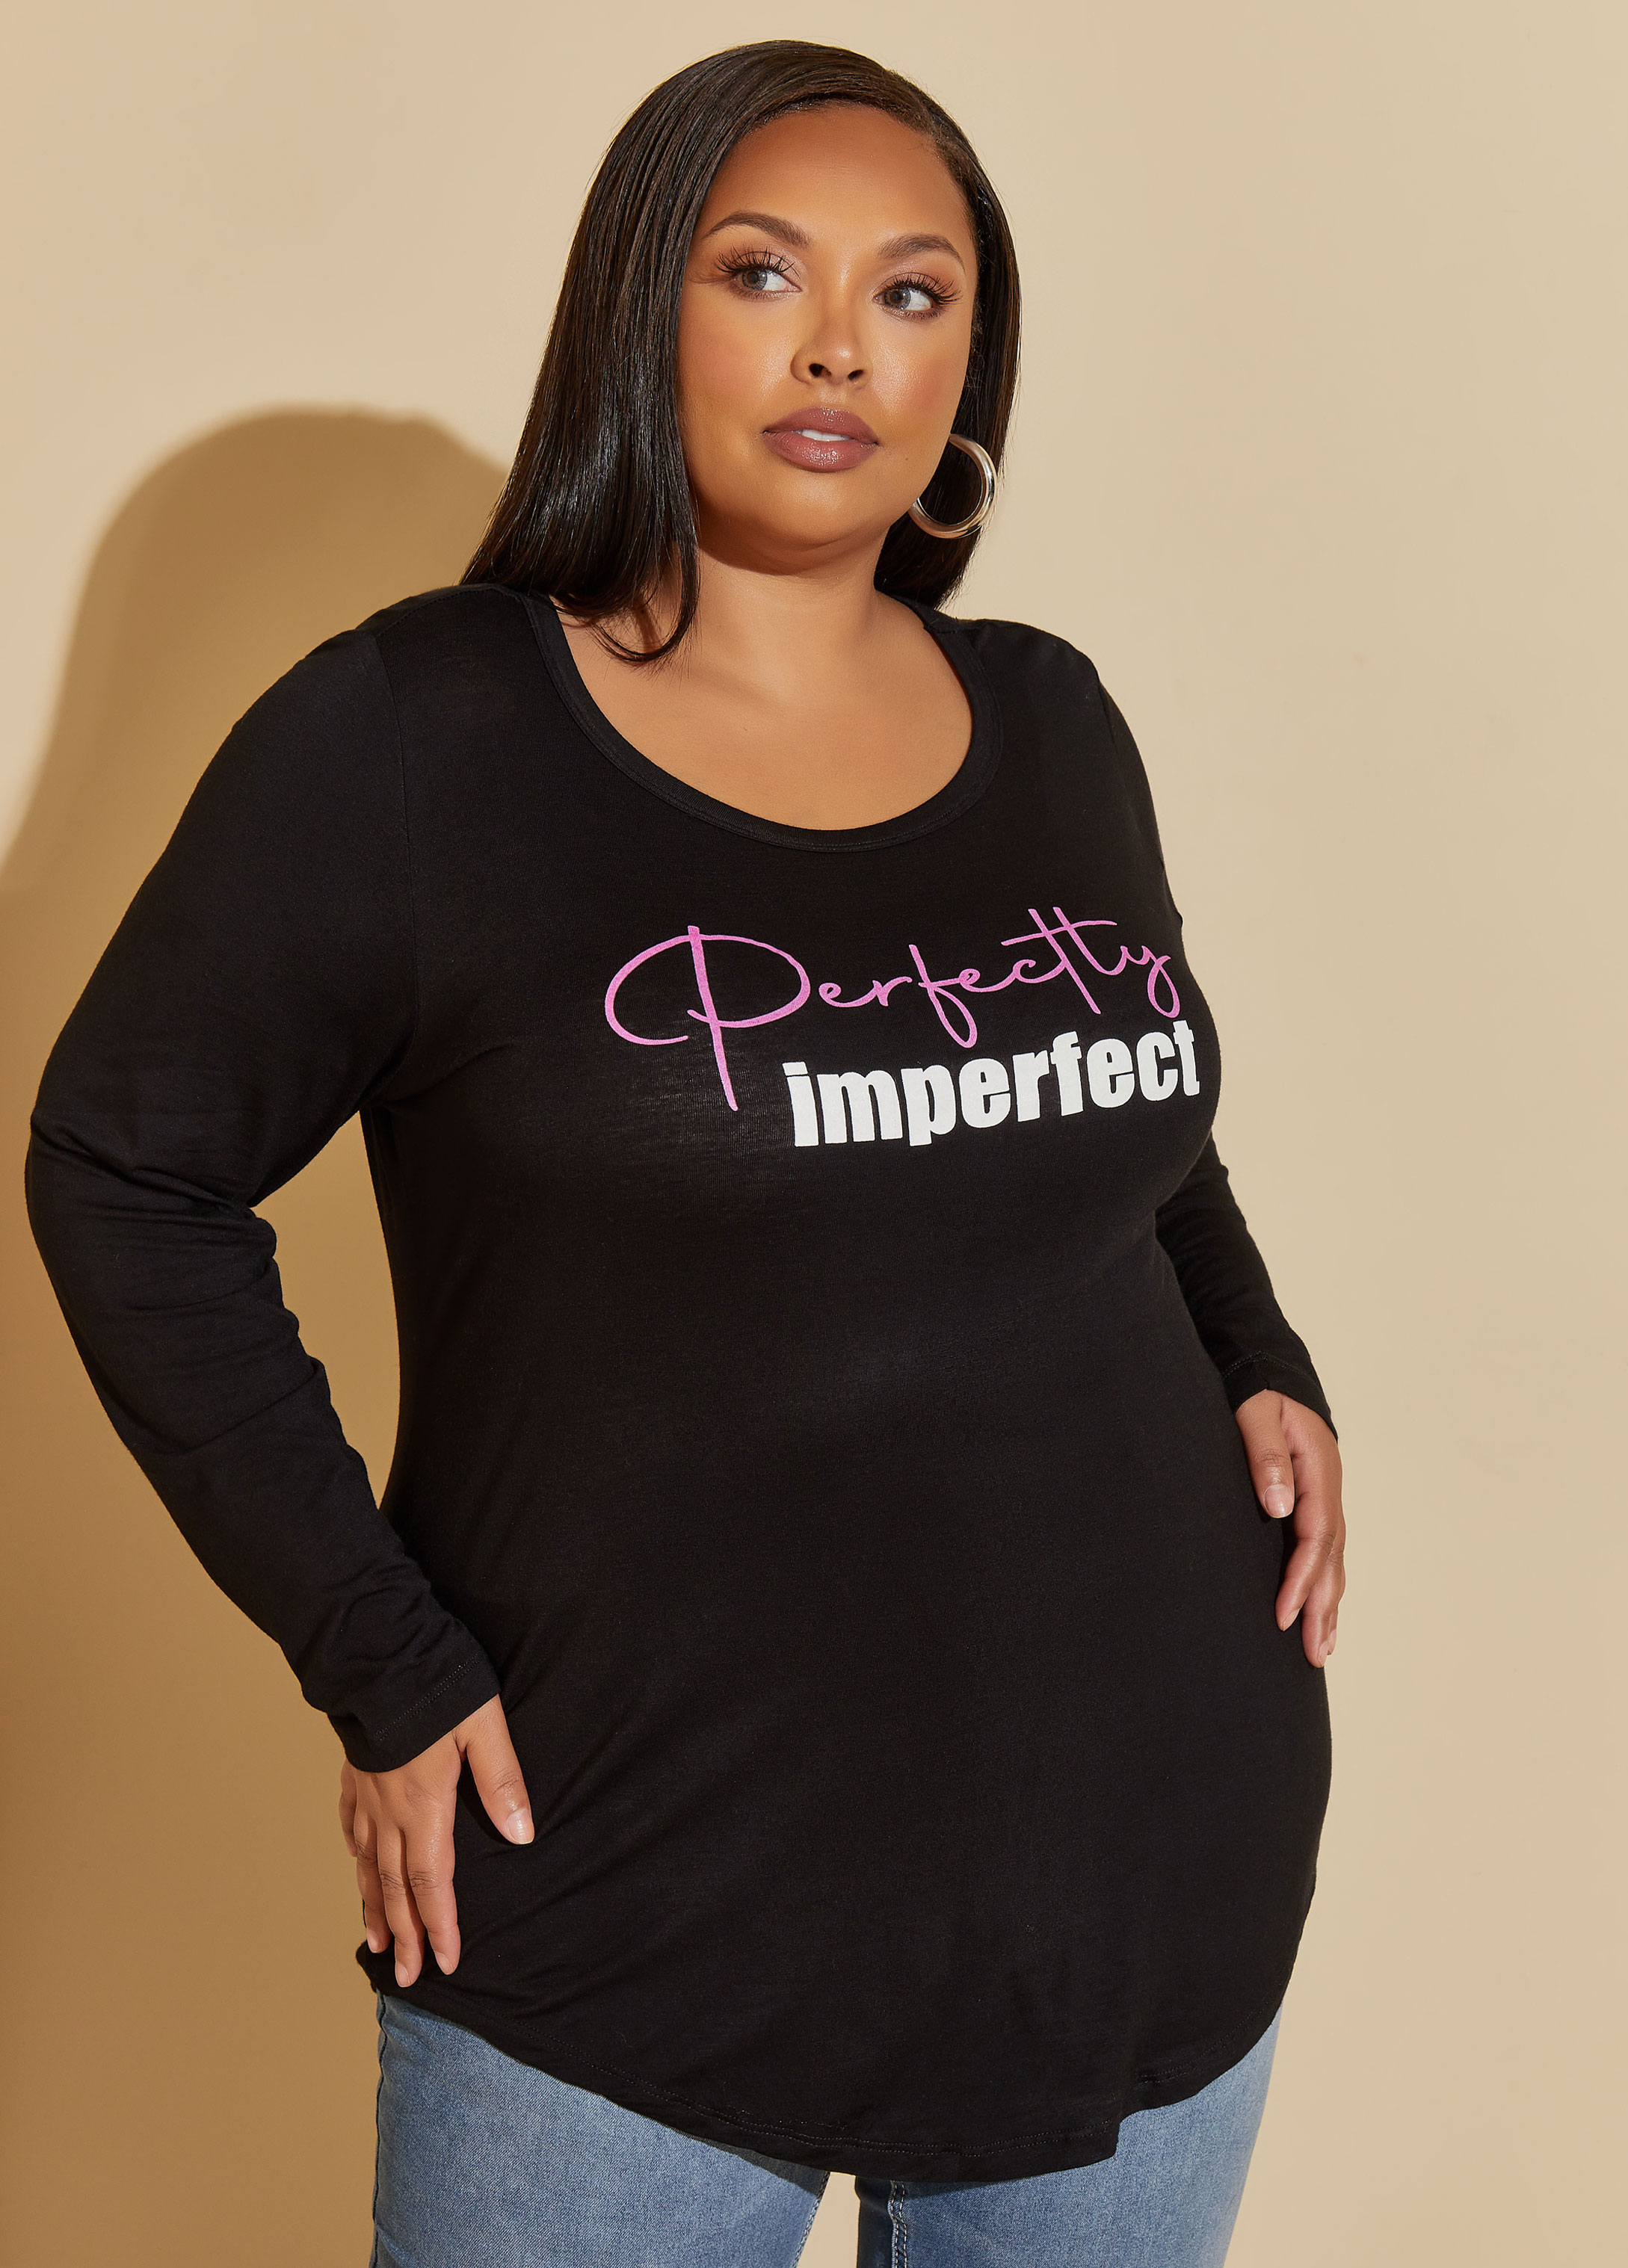 Plus Size Perfectly Imperfect Graphic Tee, BLACK, 34/36 - Ashley Stewart